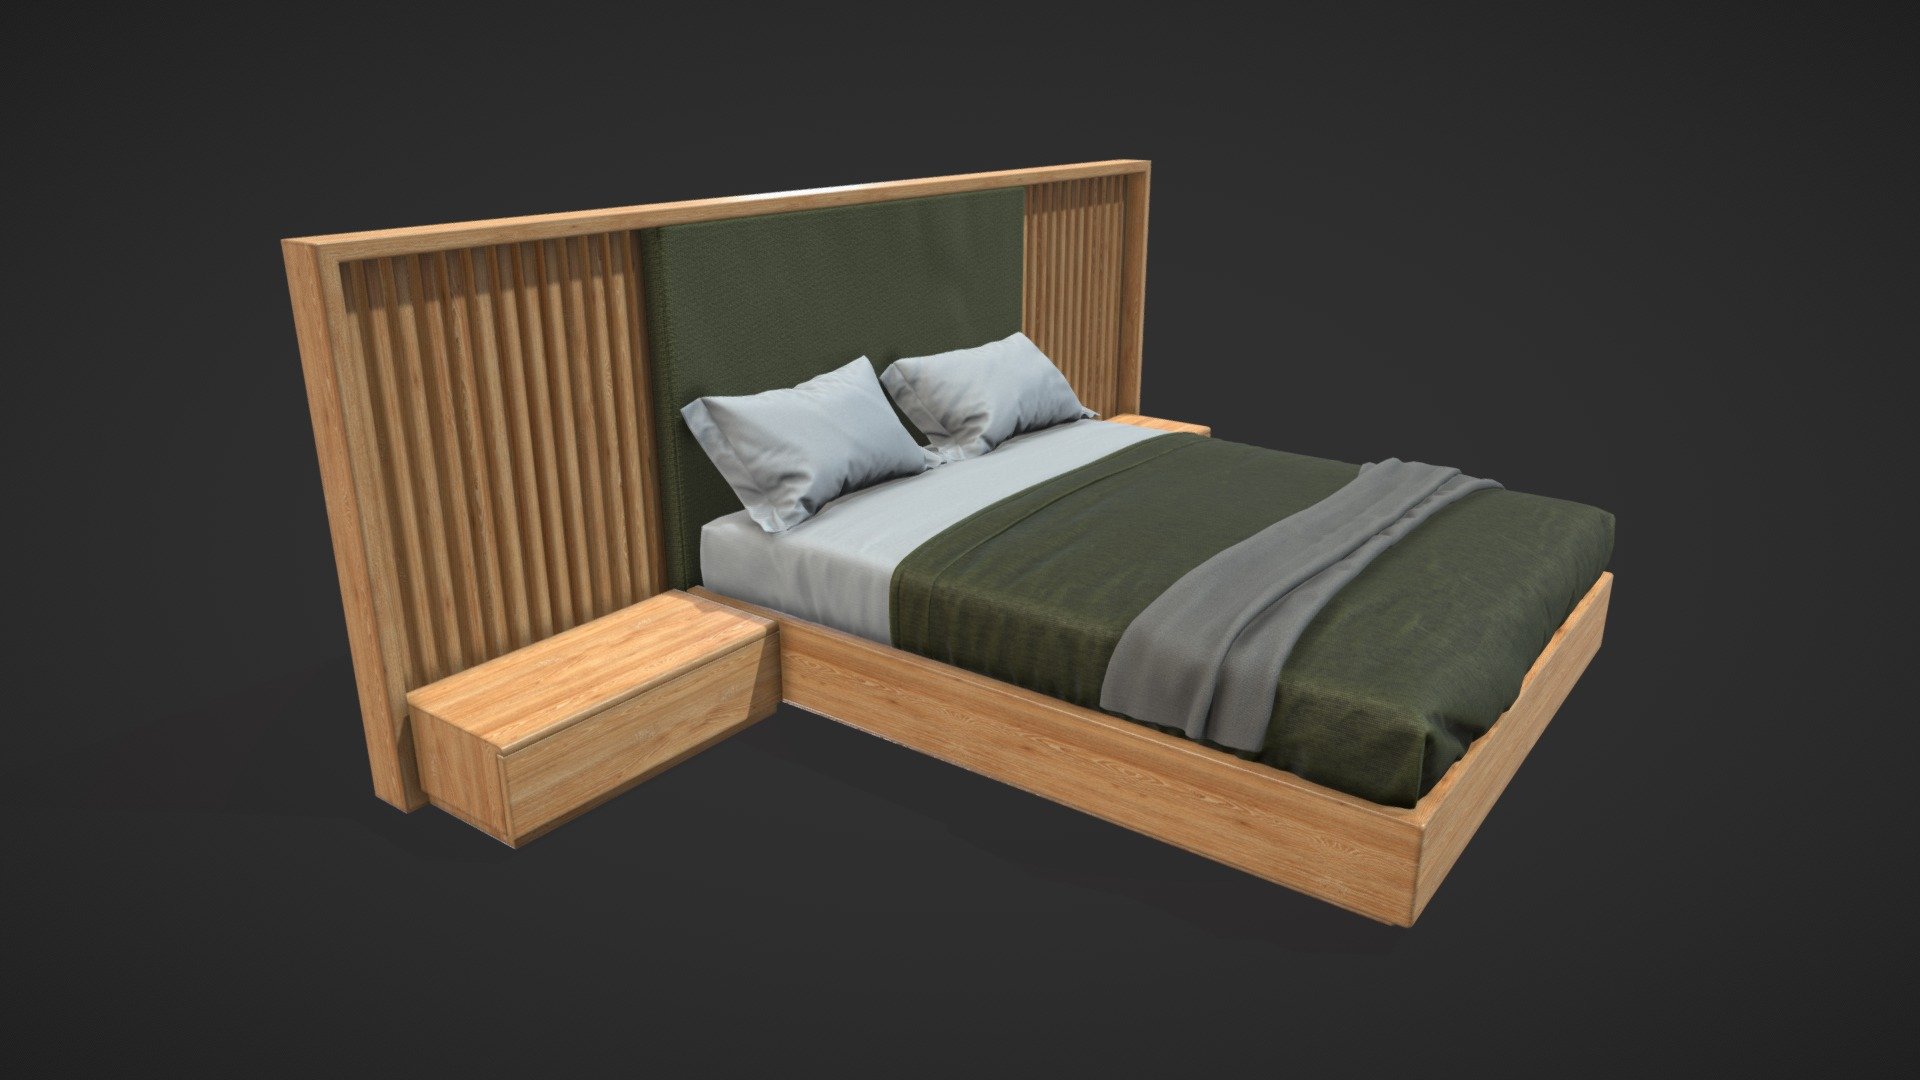 This is a 3D model of a Bed with Vertical Slatted Headboard




Made in Blender 3.x (PBR Materials) and Rendering Cycles.

Main rendering made in Blender 3.x + Cycles using some HDR Environment Textures Images for lighting which is NOT provided in the package!

What does this package include?




3D Modeling of a Bed with Vertical Slatted Headboard.

4k Textures (Base Color, Normal Map, Metallic ,Roughness, Ambient Occlusion)

Important notes




File format included - (Blend, FBX, OBJ, GLB, STL)

Texture size - 4K

Uvs non - overlapping

Polygon: Quads

Centered at 0,0,0

In some formats may be needed to reassign textures and add HDR Environment Textures Images for lighting.

Not lights include

No special plugin needed to open the scene.

If you like my work, please leave your comment and like, it helps me a lot to create new content. If you have any questions or changes about colors or another thing, you can contact me at we3domodel@gmail.com - Bed with Vertical Slatted Headboard Low Poly - Buy Royalty Free 3D model by We3Do (@we3DoModel) 3d model